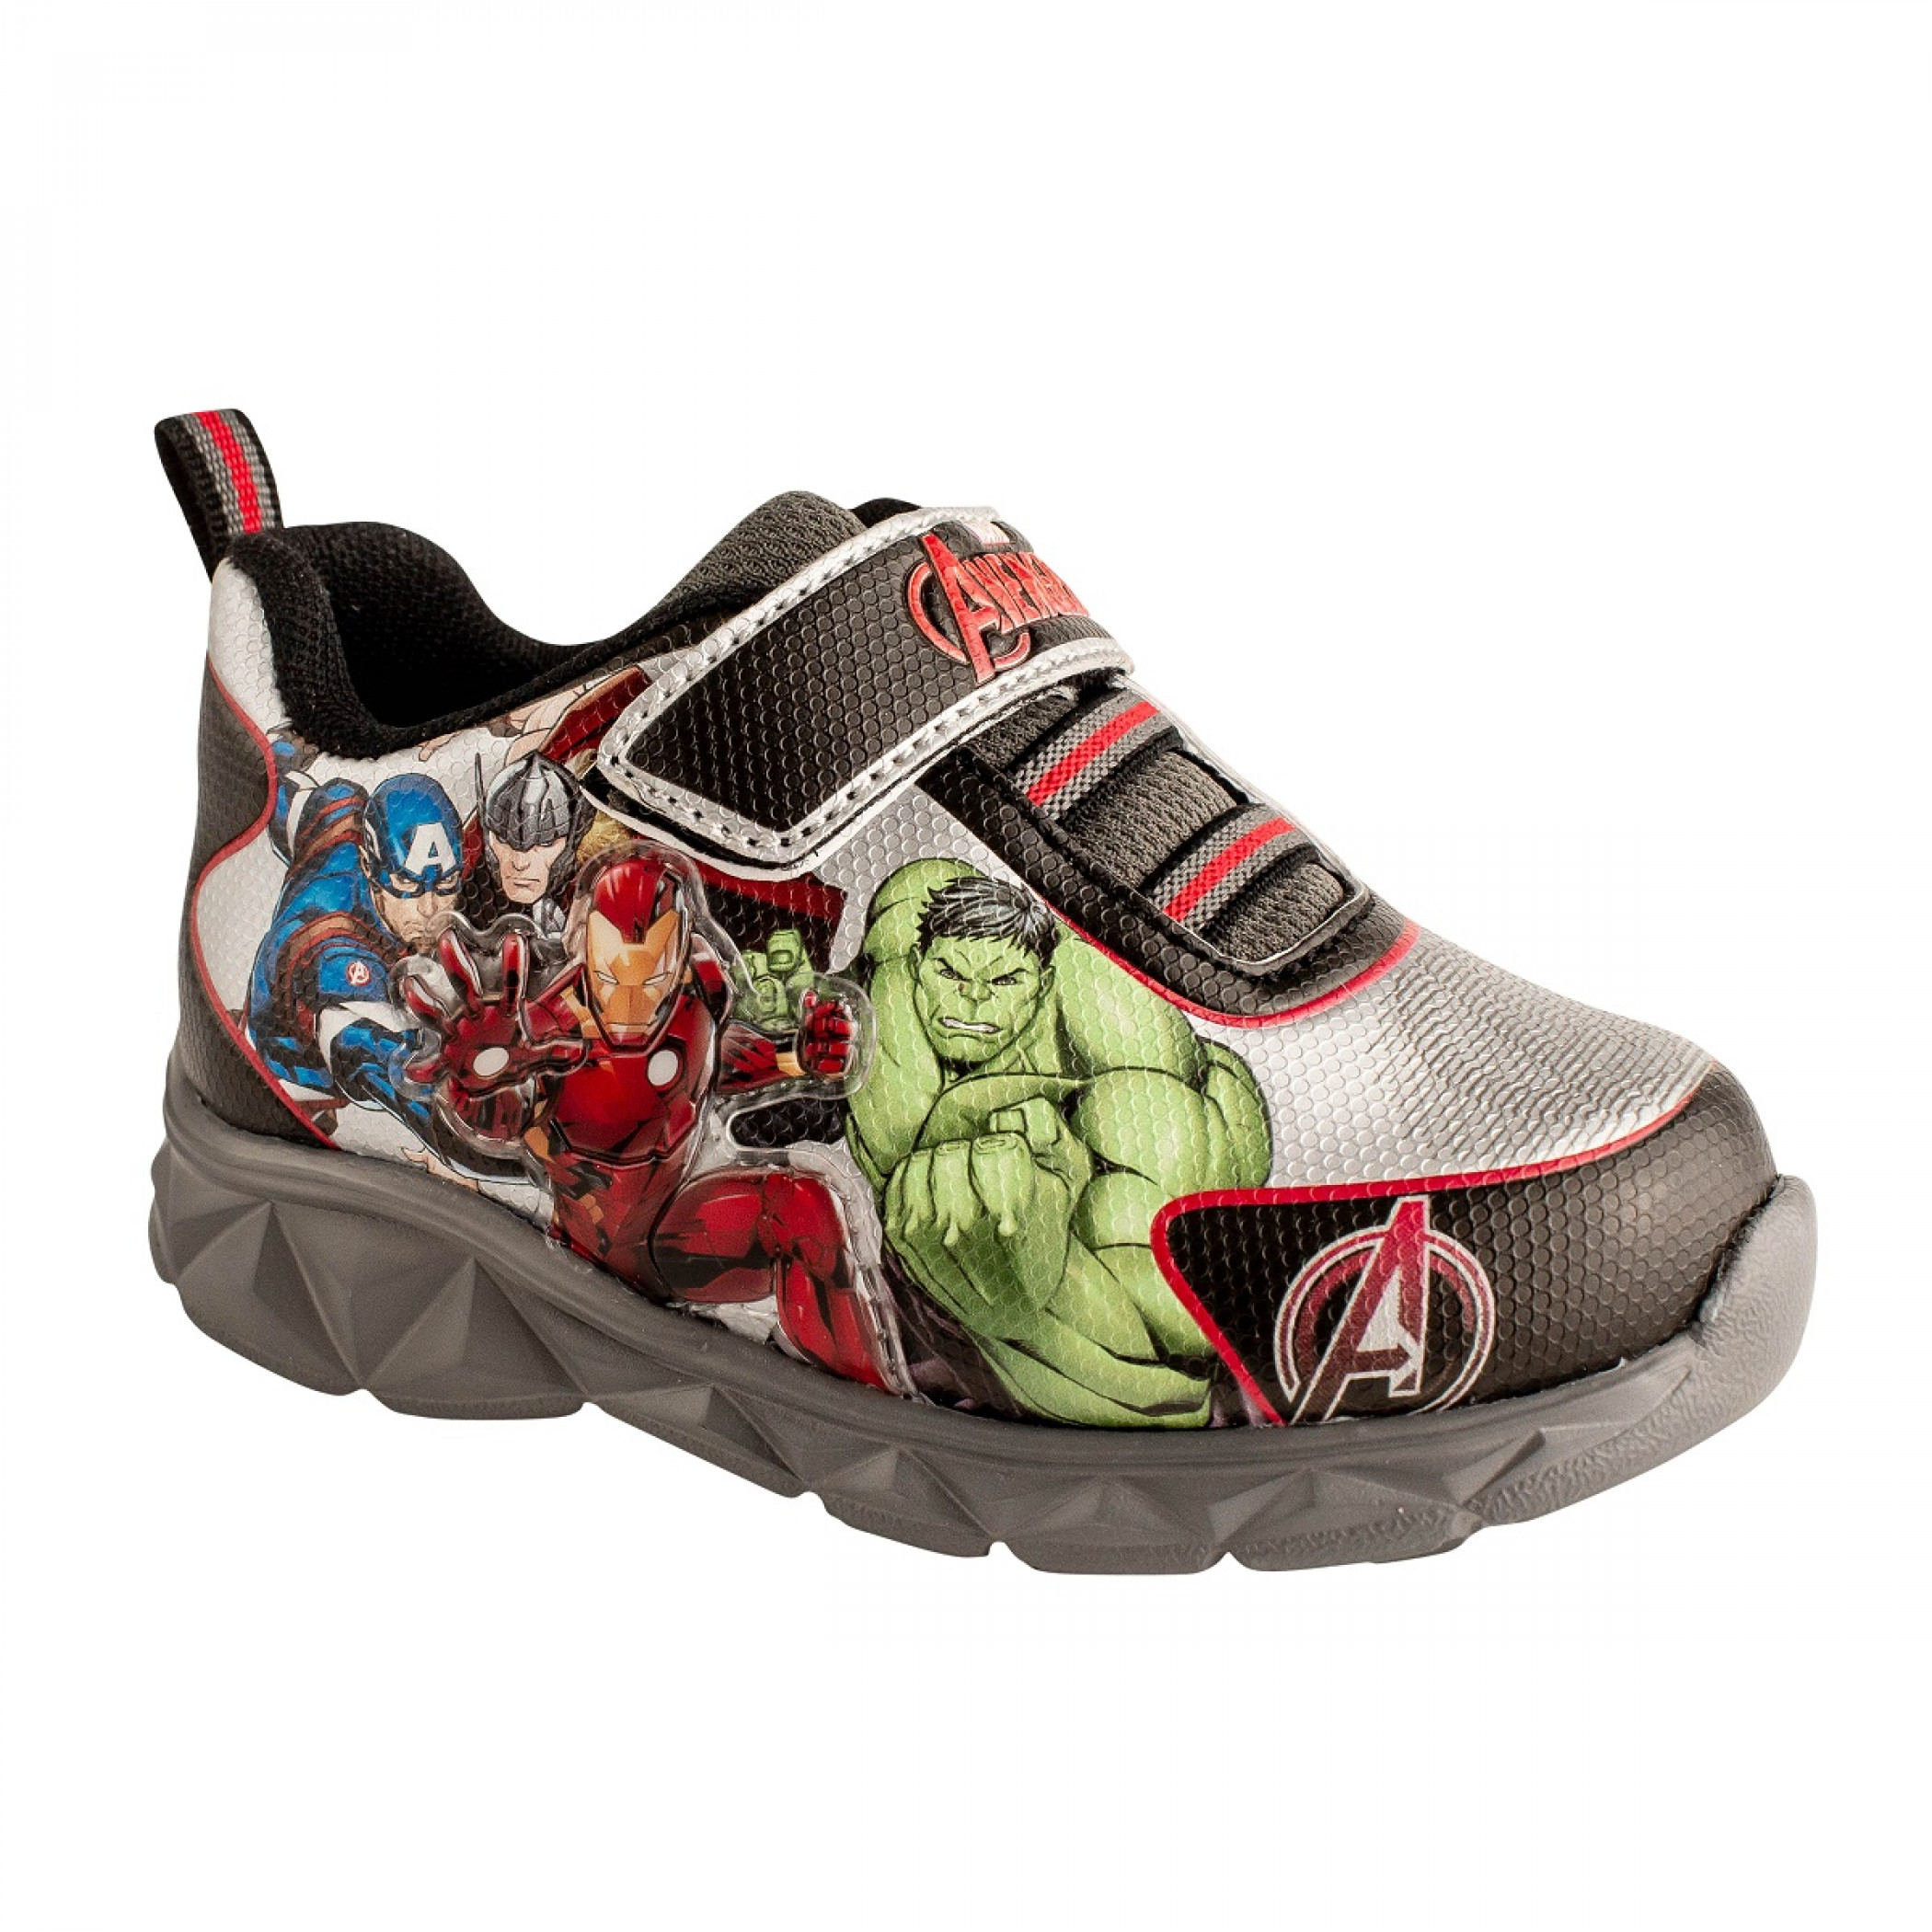 Avengers Heroes Stance Kids Light Up Shoes